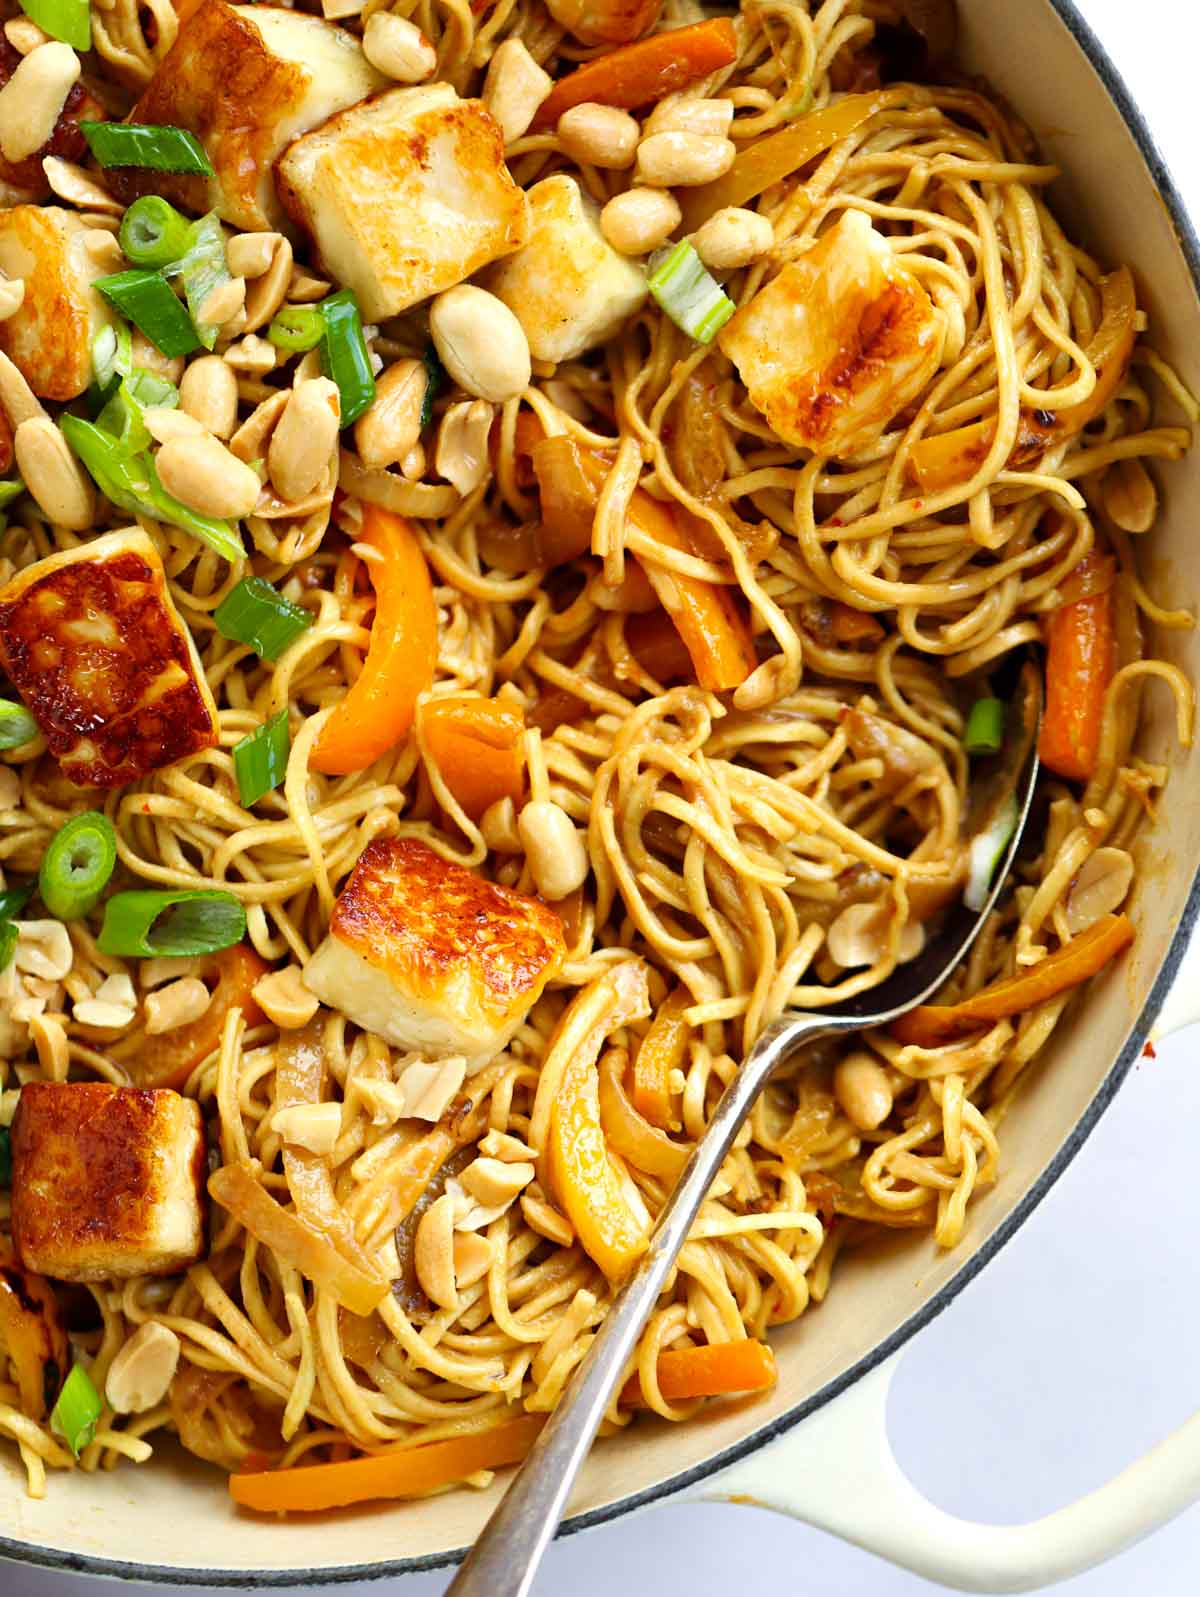 A tasty recipe for peanut butter noodles with halloumi